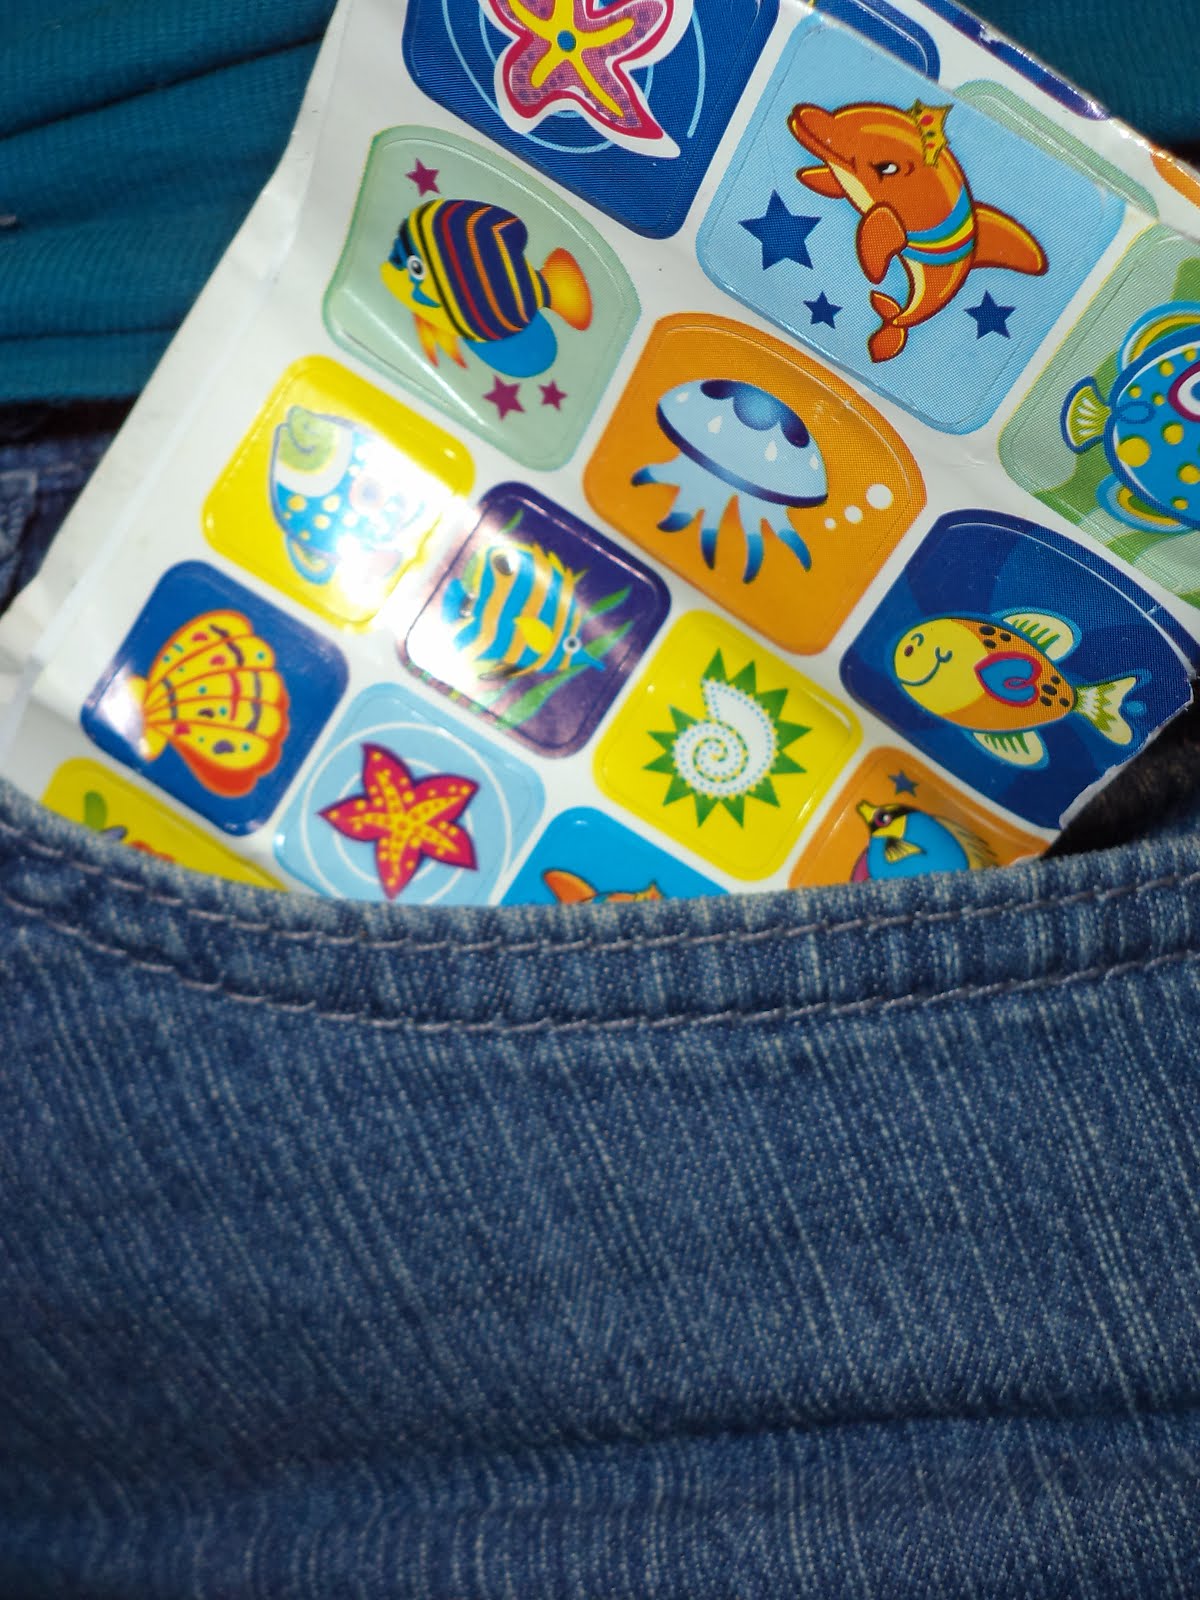 Pocket Full of Stickers